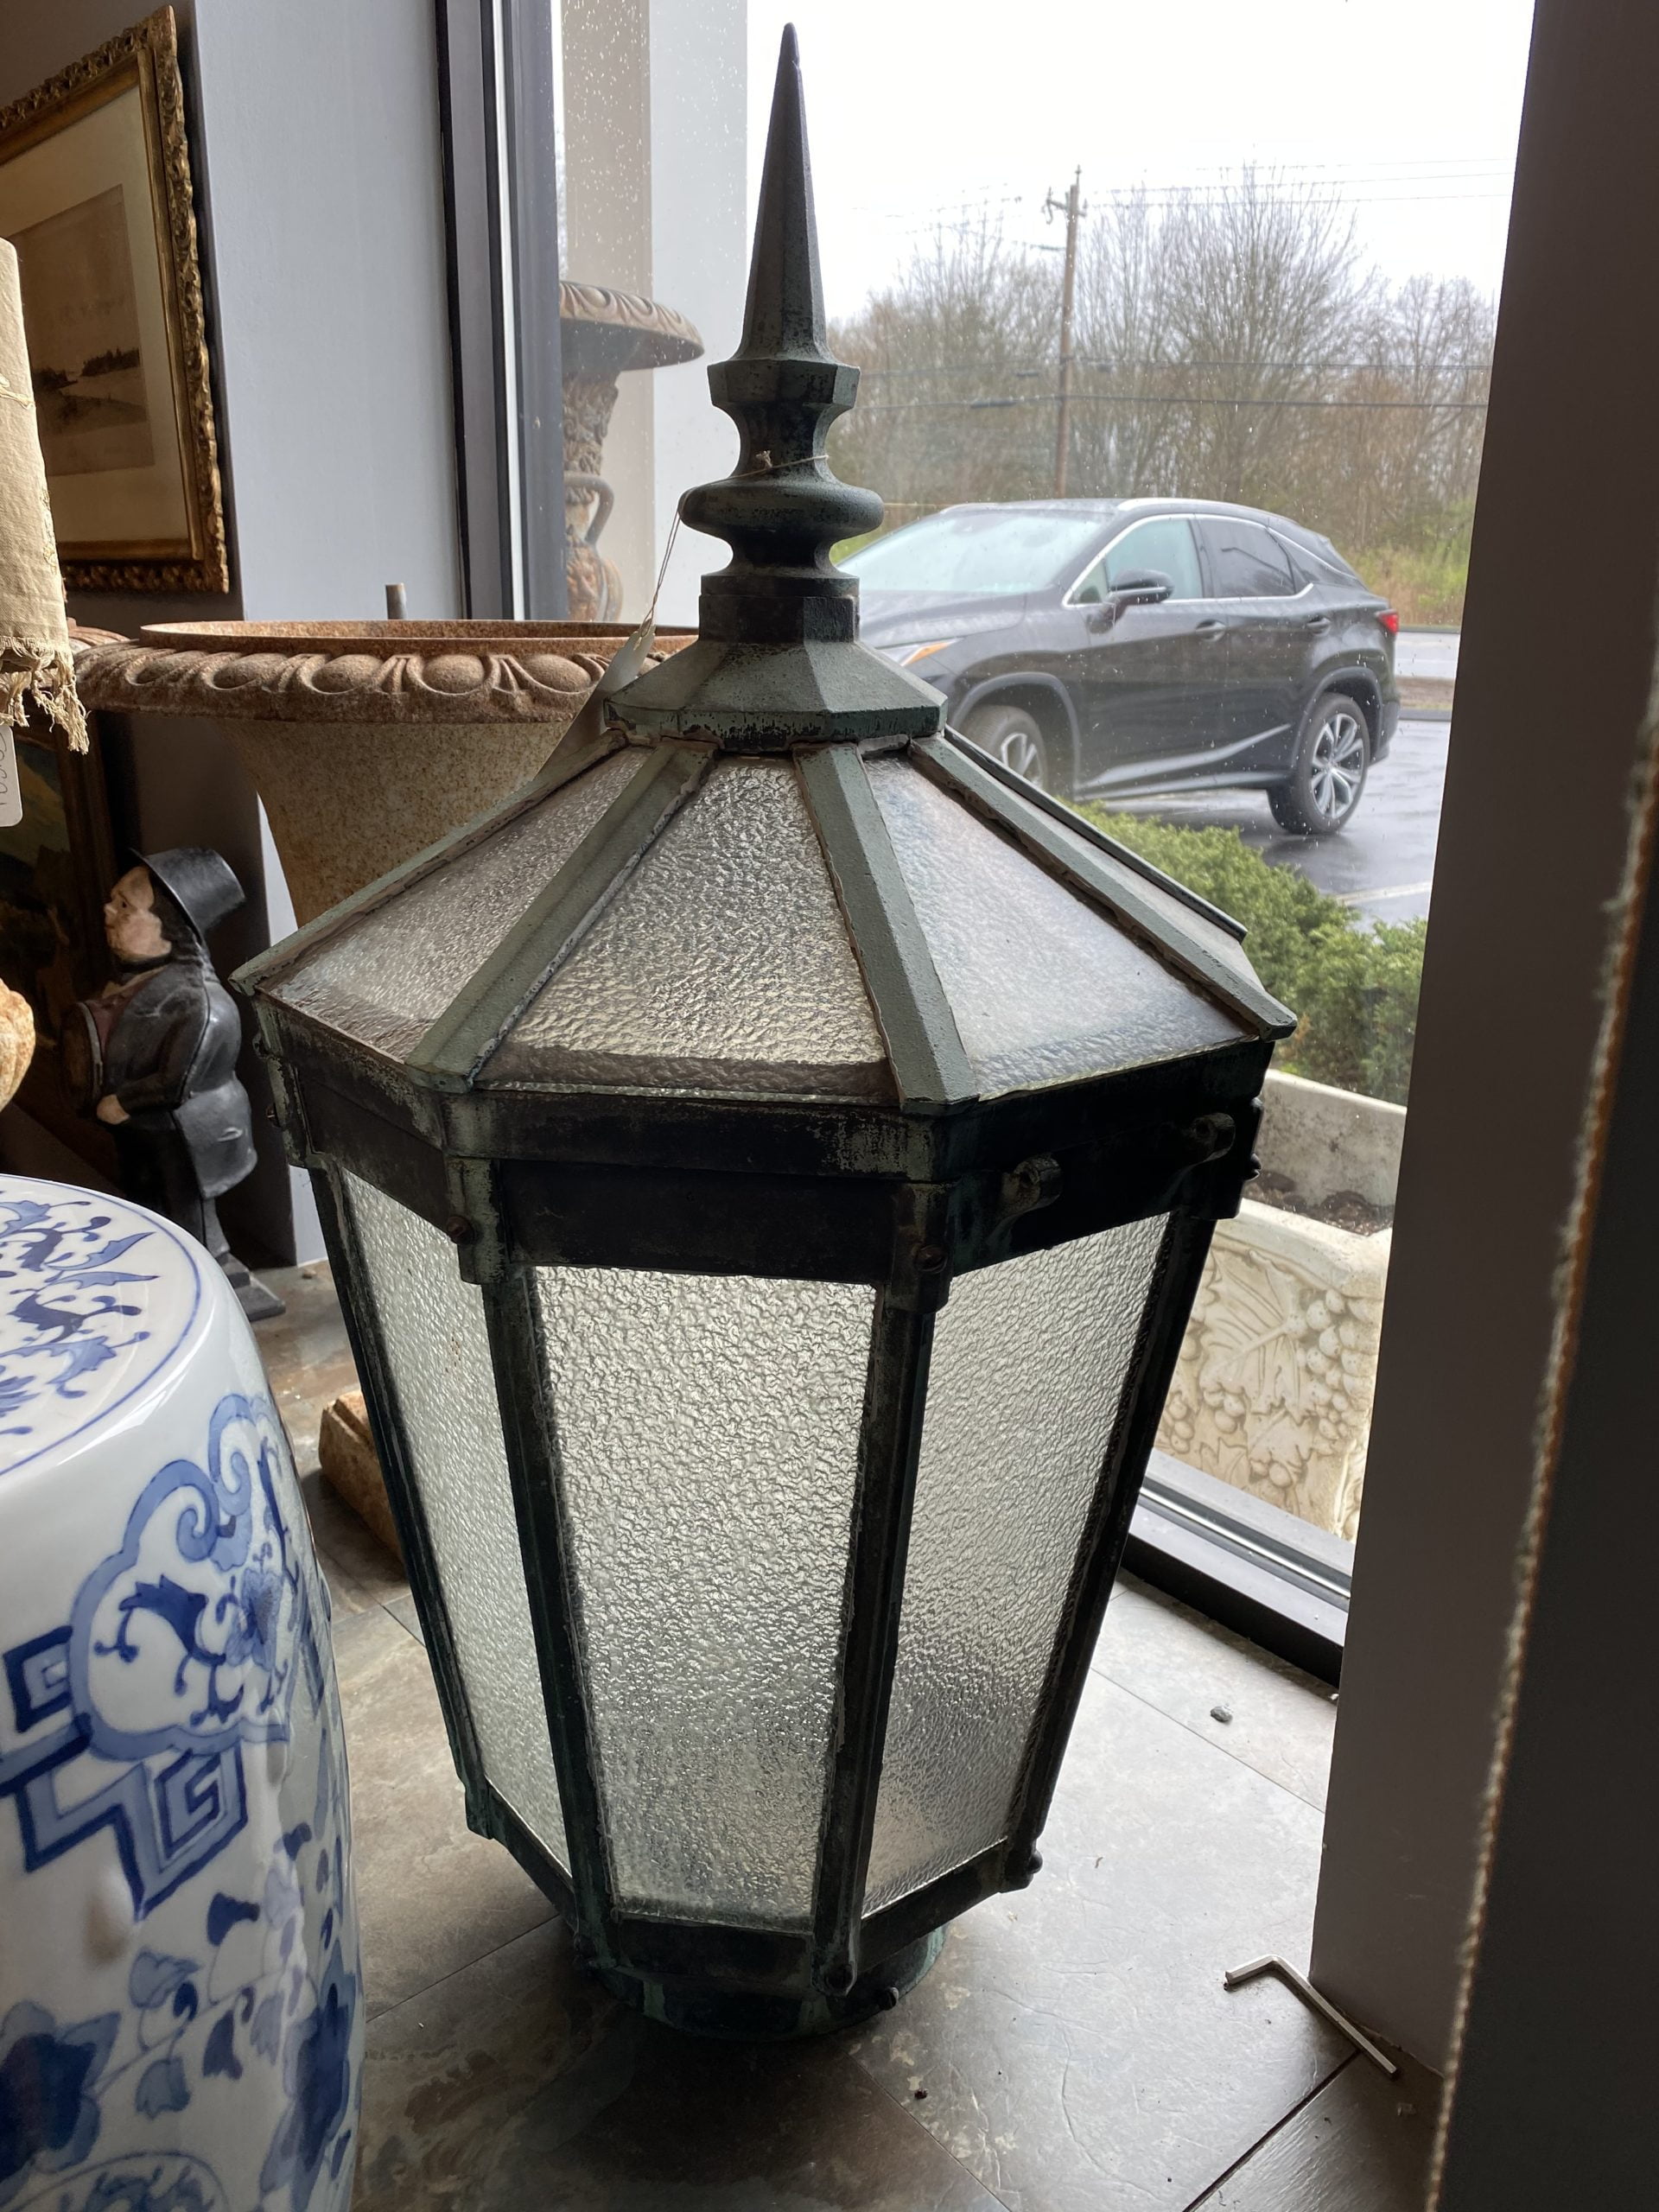 Broad Street Collection, BS-16 Victorian Lantern